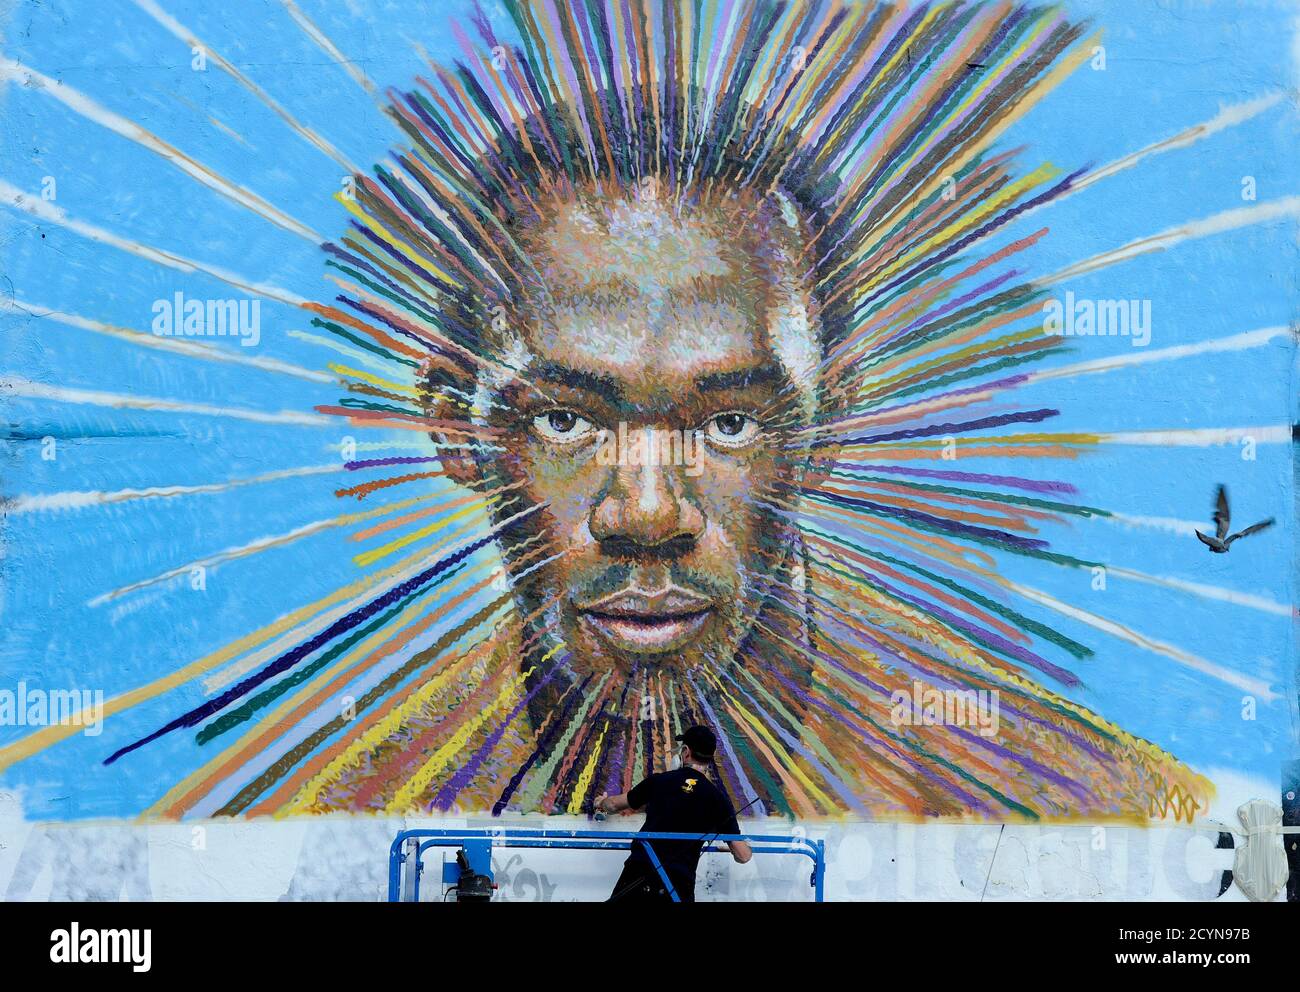 Street artist James Cochran, also known as Jimmy C, works on his spray painted picture of Jamaican sprinter Usain Bolt in Sclater street car park in east London July 19, 2012. Cochran said this was done as an homage to the London 2012 Olympic Games, which begin July 27. REUTERS/Paul Hackett  (BRITAIN - Tags: SPORT OLYMPICS ATHLETICS ENTERTAINMENT) Stock Photo